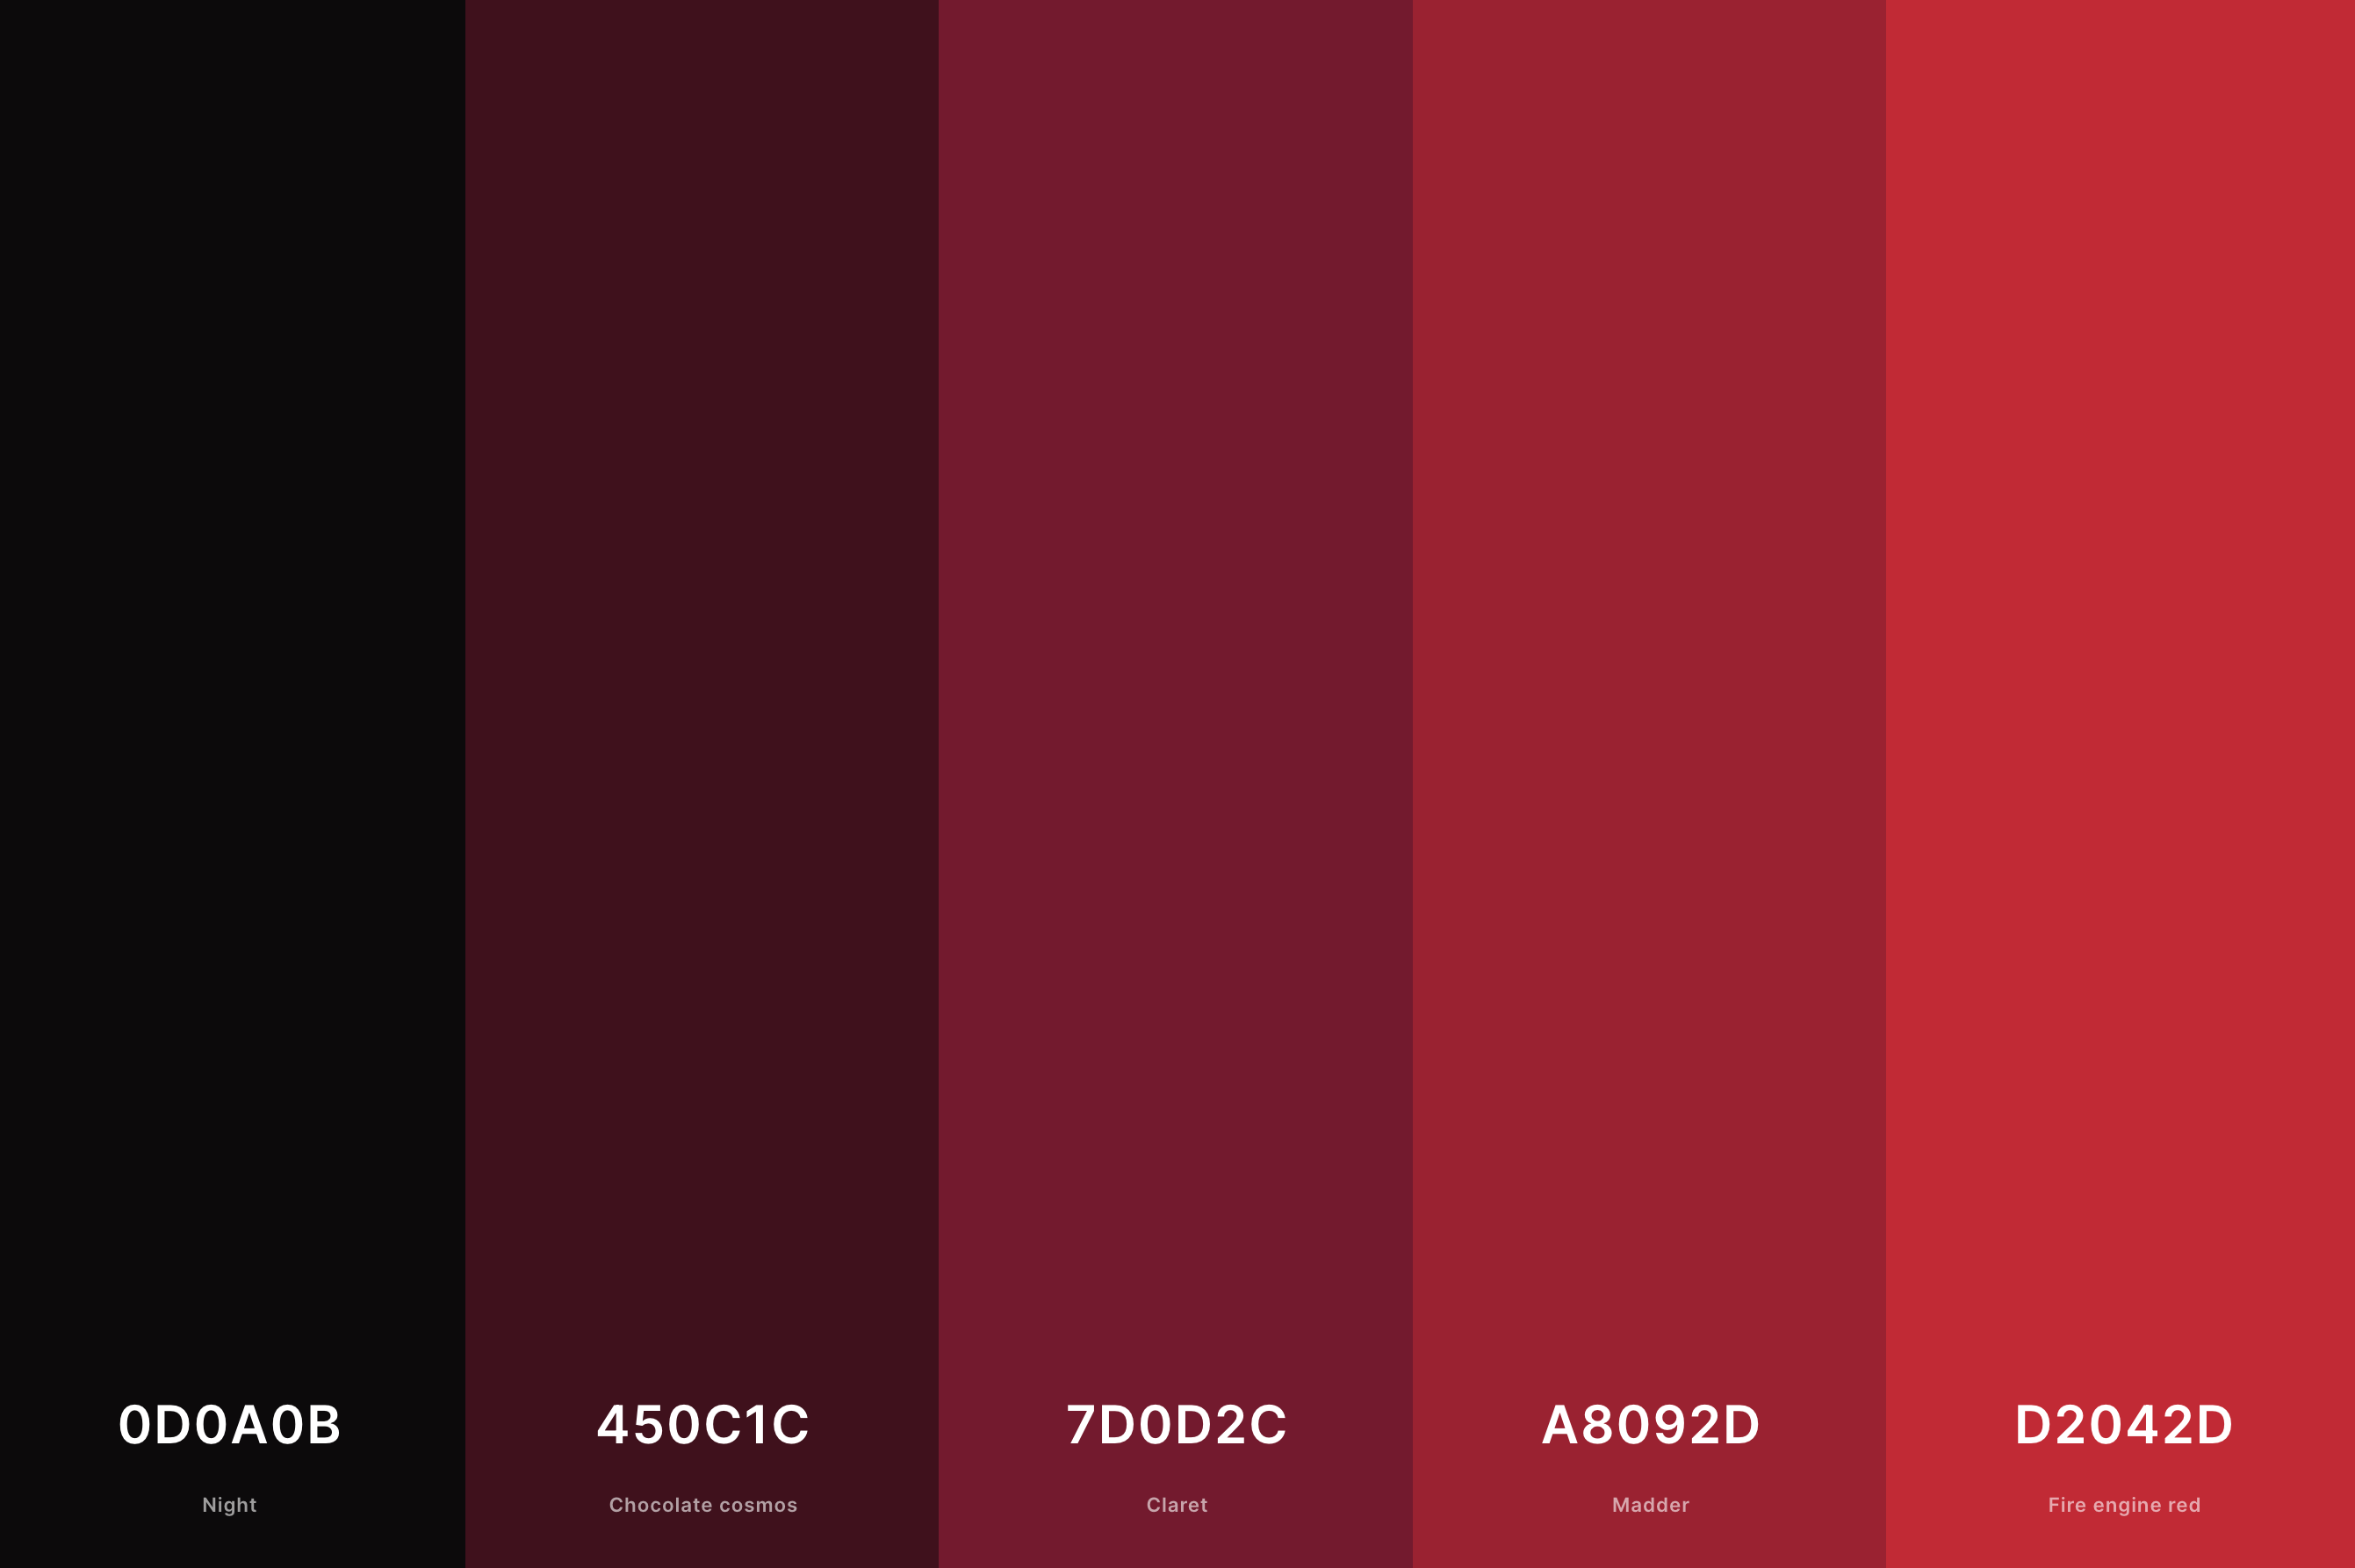 27. Black Cherry Color Palette Color Palette with Night (Hex #0D0A0B) + Chocolate Cosmos (Hex #450C1C) + Claret (Hex #7D0D2C) + Madder (Hex #A8092D) + Fire Engine Red (Hex #D2042D) Color Palette with Hex Codes